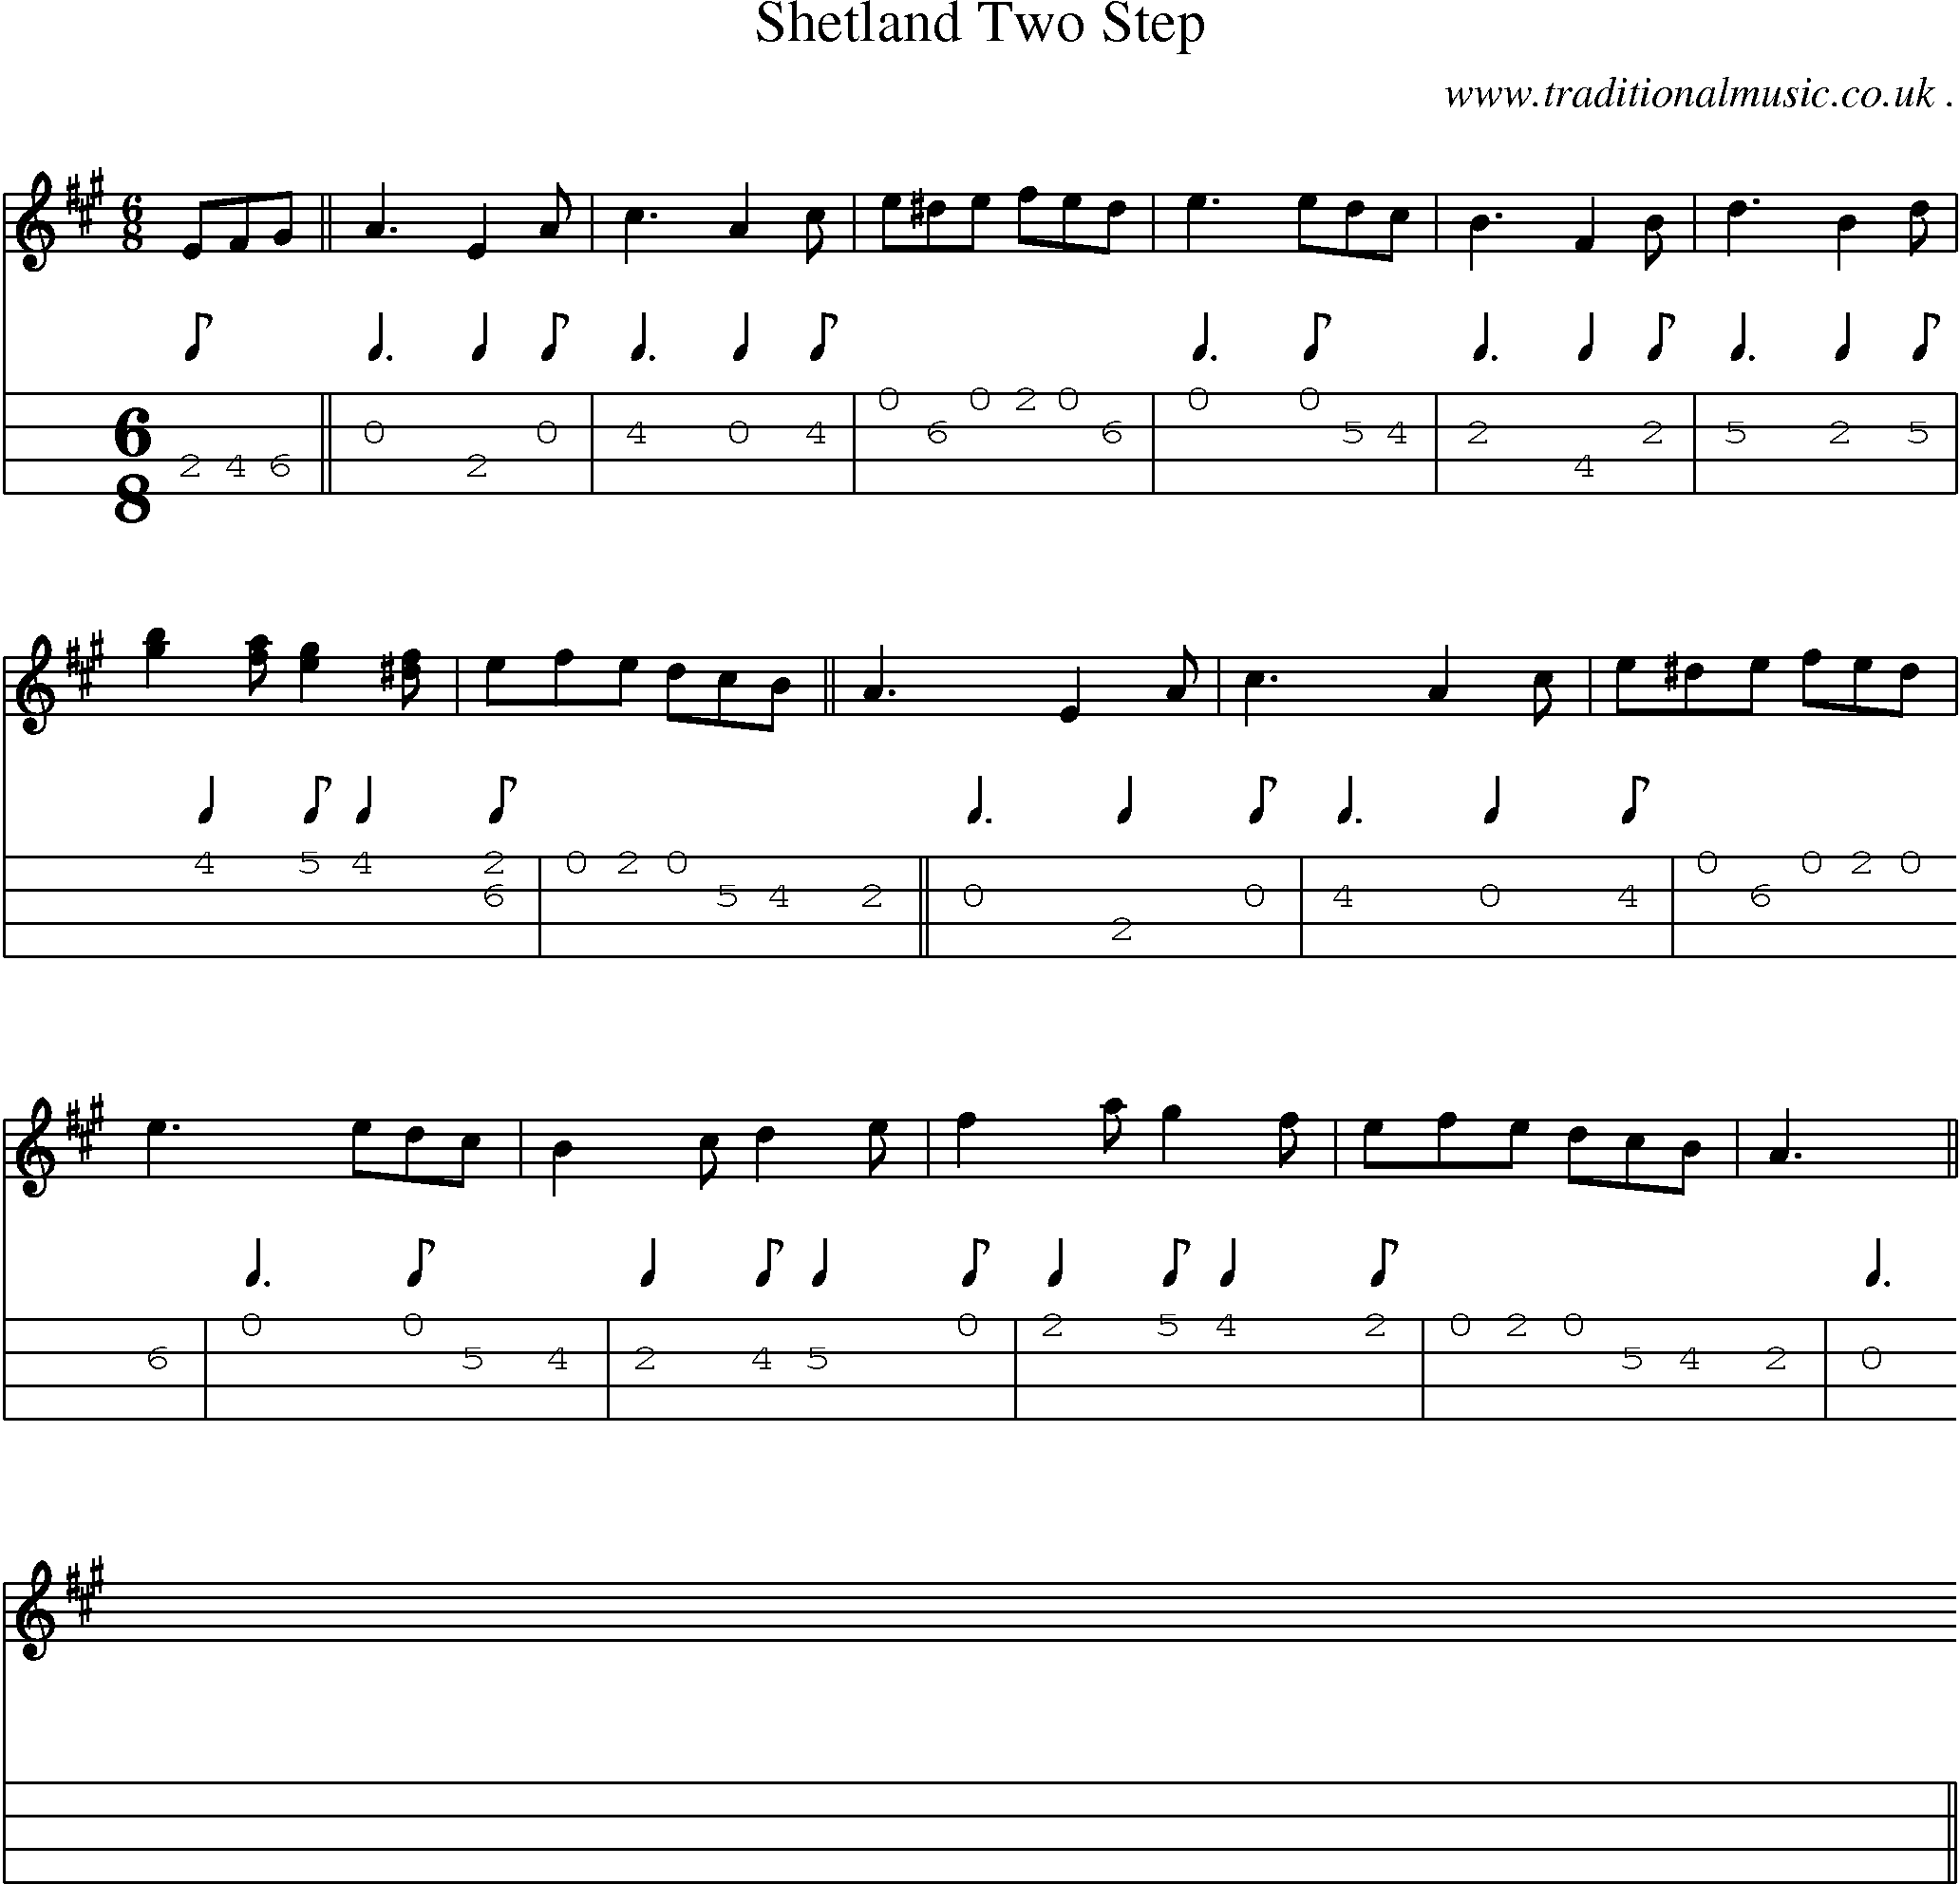 Sheet-music  score, Chords and Mandolin Tabs for Shetland Two Step